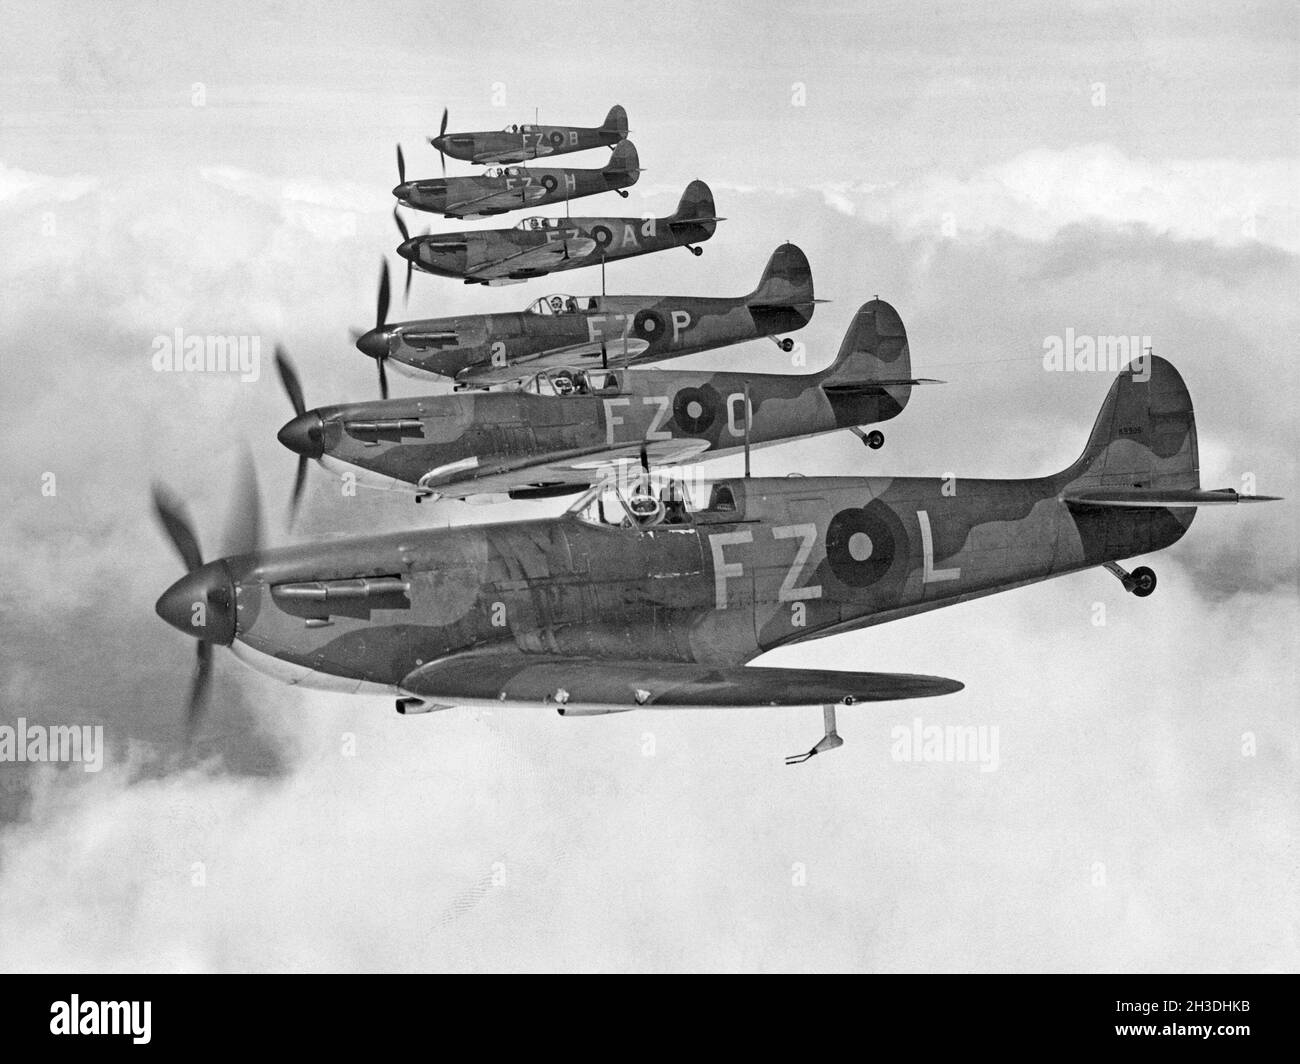 Airplane history. British fighter aircrafts, Supermarine Spitfire in the air, one in front of the other. Stock Photo